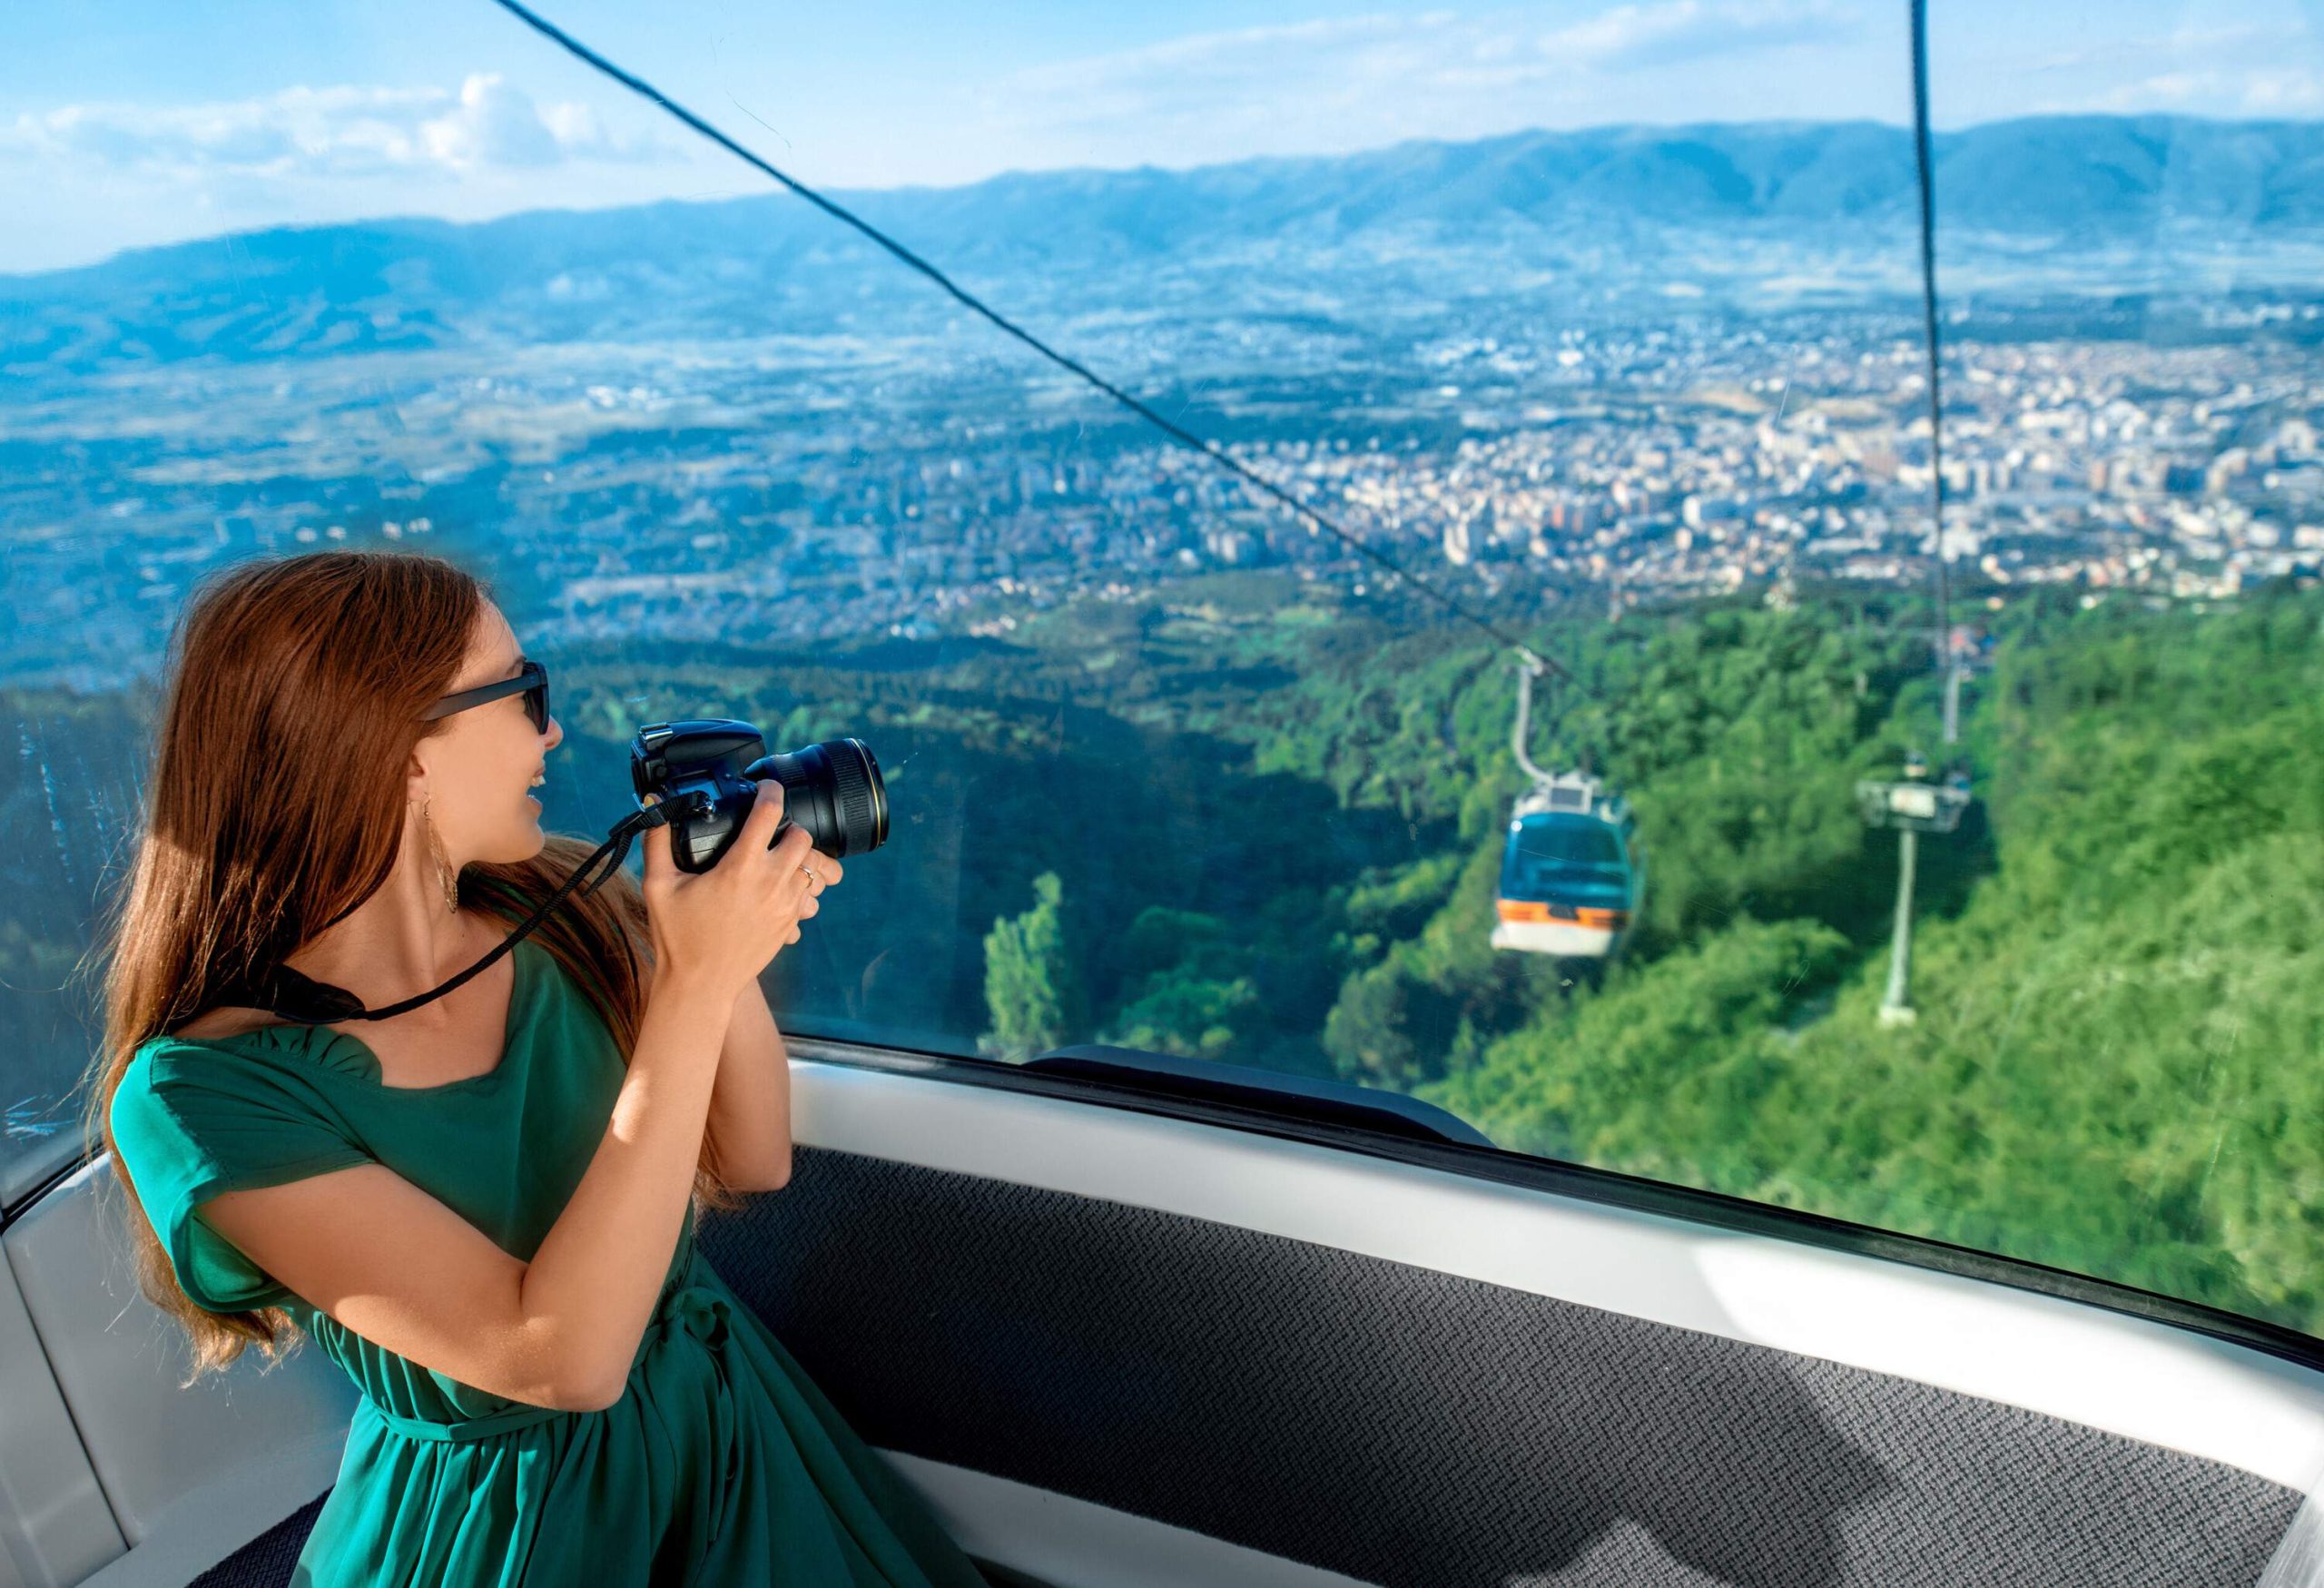 A woman aboard a cable car staring out the window with a camera.